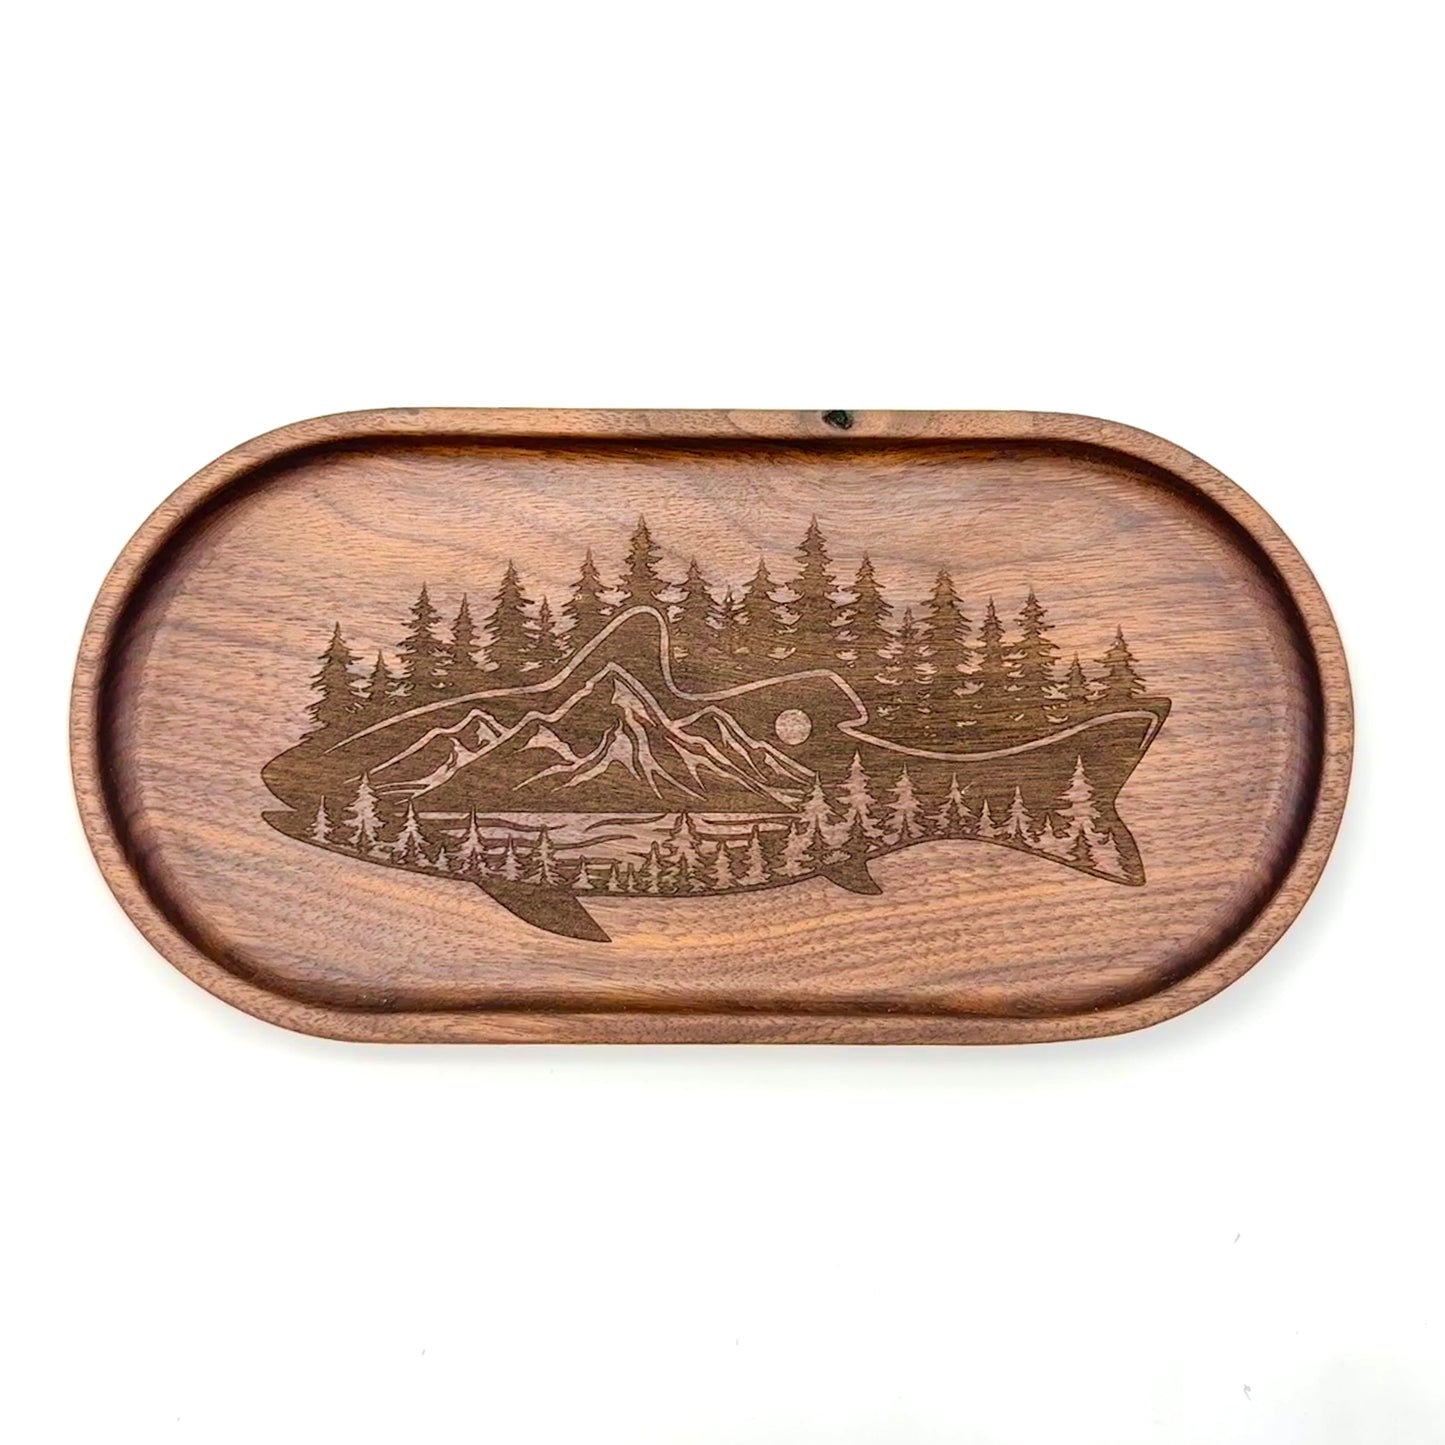 Catch-All Tray (Large) | Walnut/Cherry Wood | Handcrafted, Laser Etched Design | 5x10